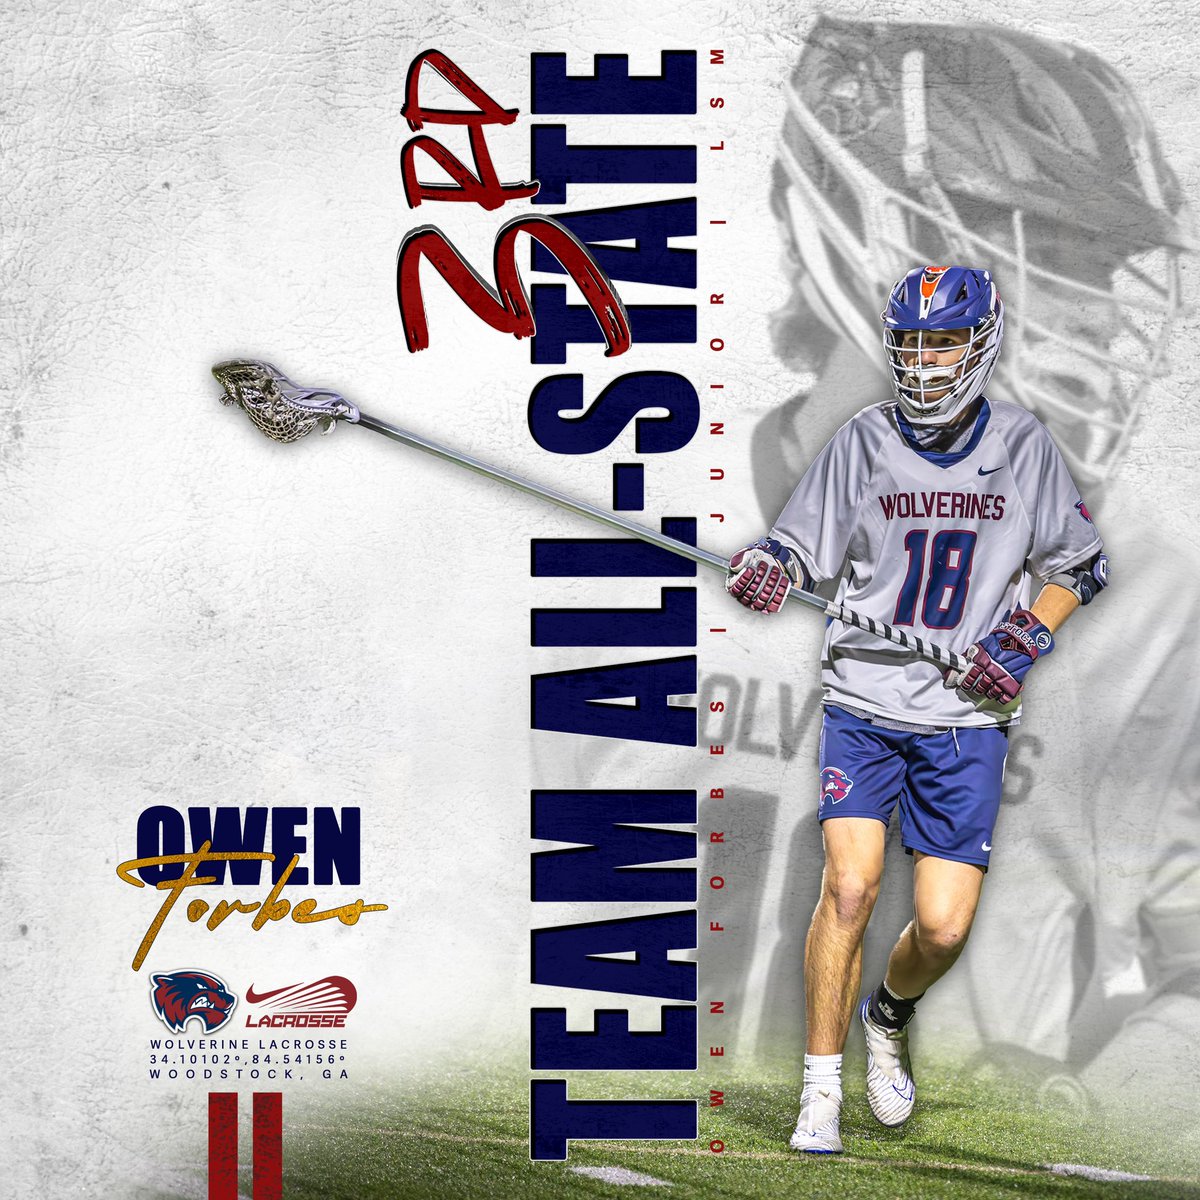 🥉𝗖𝗢𝗡𝗚𝗥𝗔𝗧𝗨𝗟𝗔𝗧𝗜𝗢𝗡𝗦🥉@Owen_forbes_7 on being recognized by coaches across the state as the top LSM’s in Georgia! . 3️⃣rd Team All-State: 𝗟𝗦𝗠 . . #1woodstock #legacybegins #lax #lacrosse #lacrossephotography #laxbro #lsm